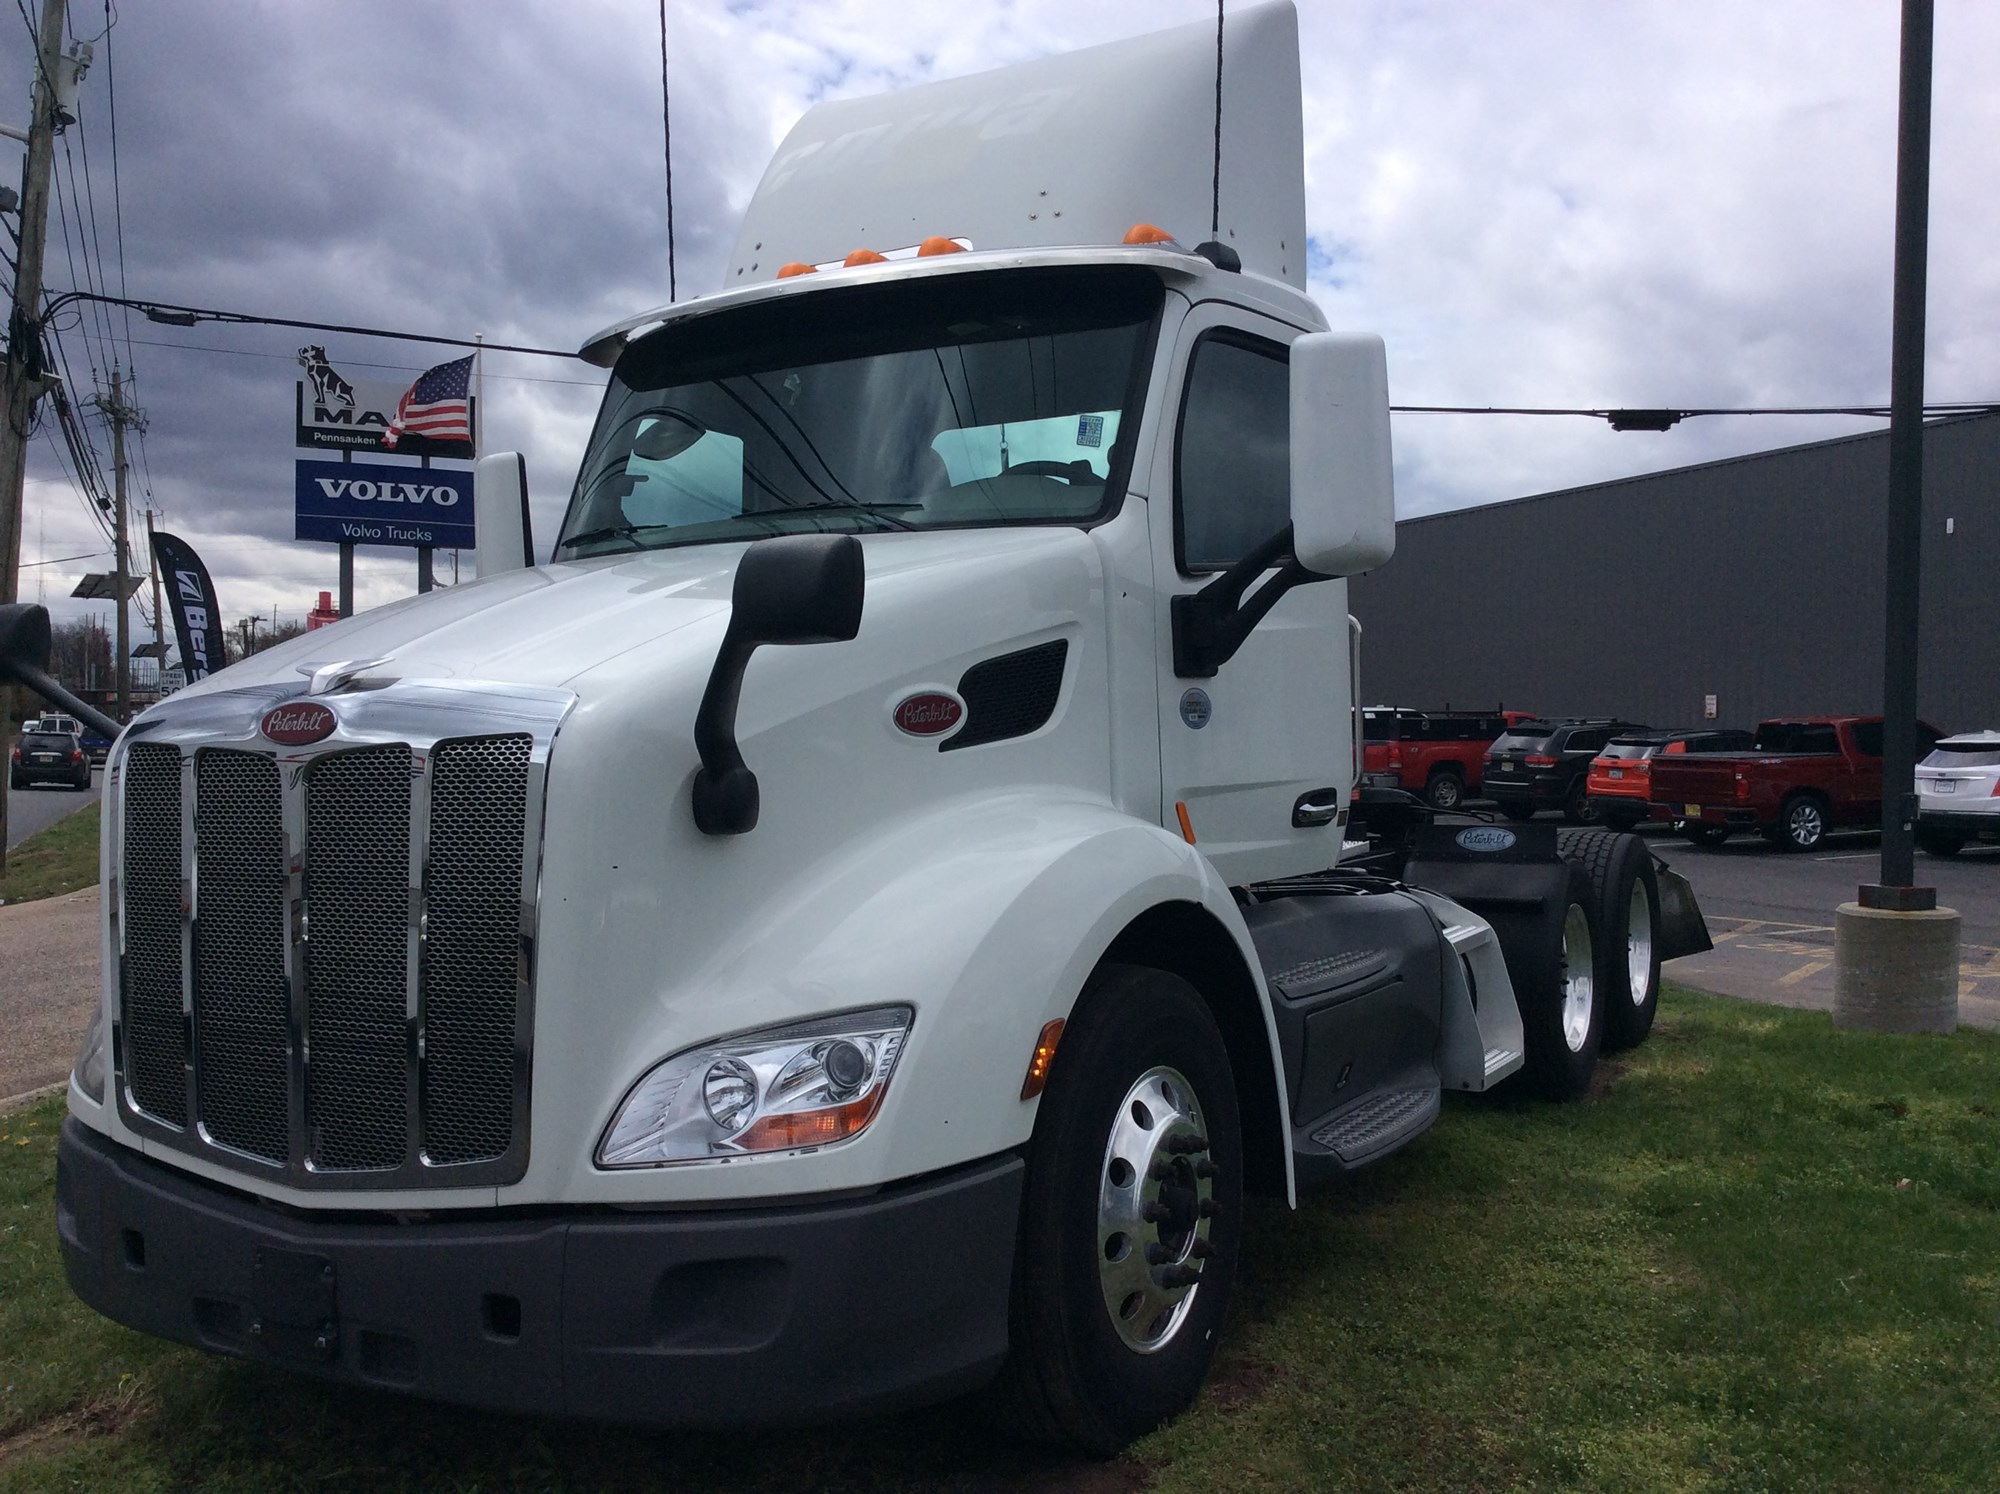 Used Truck Inventory - 1000879 01 - 80